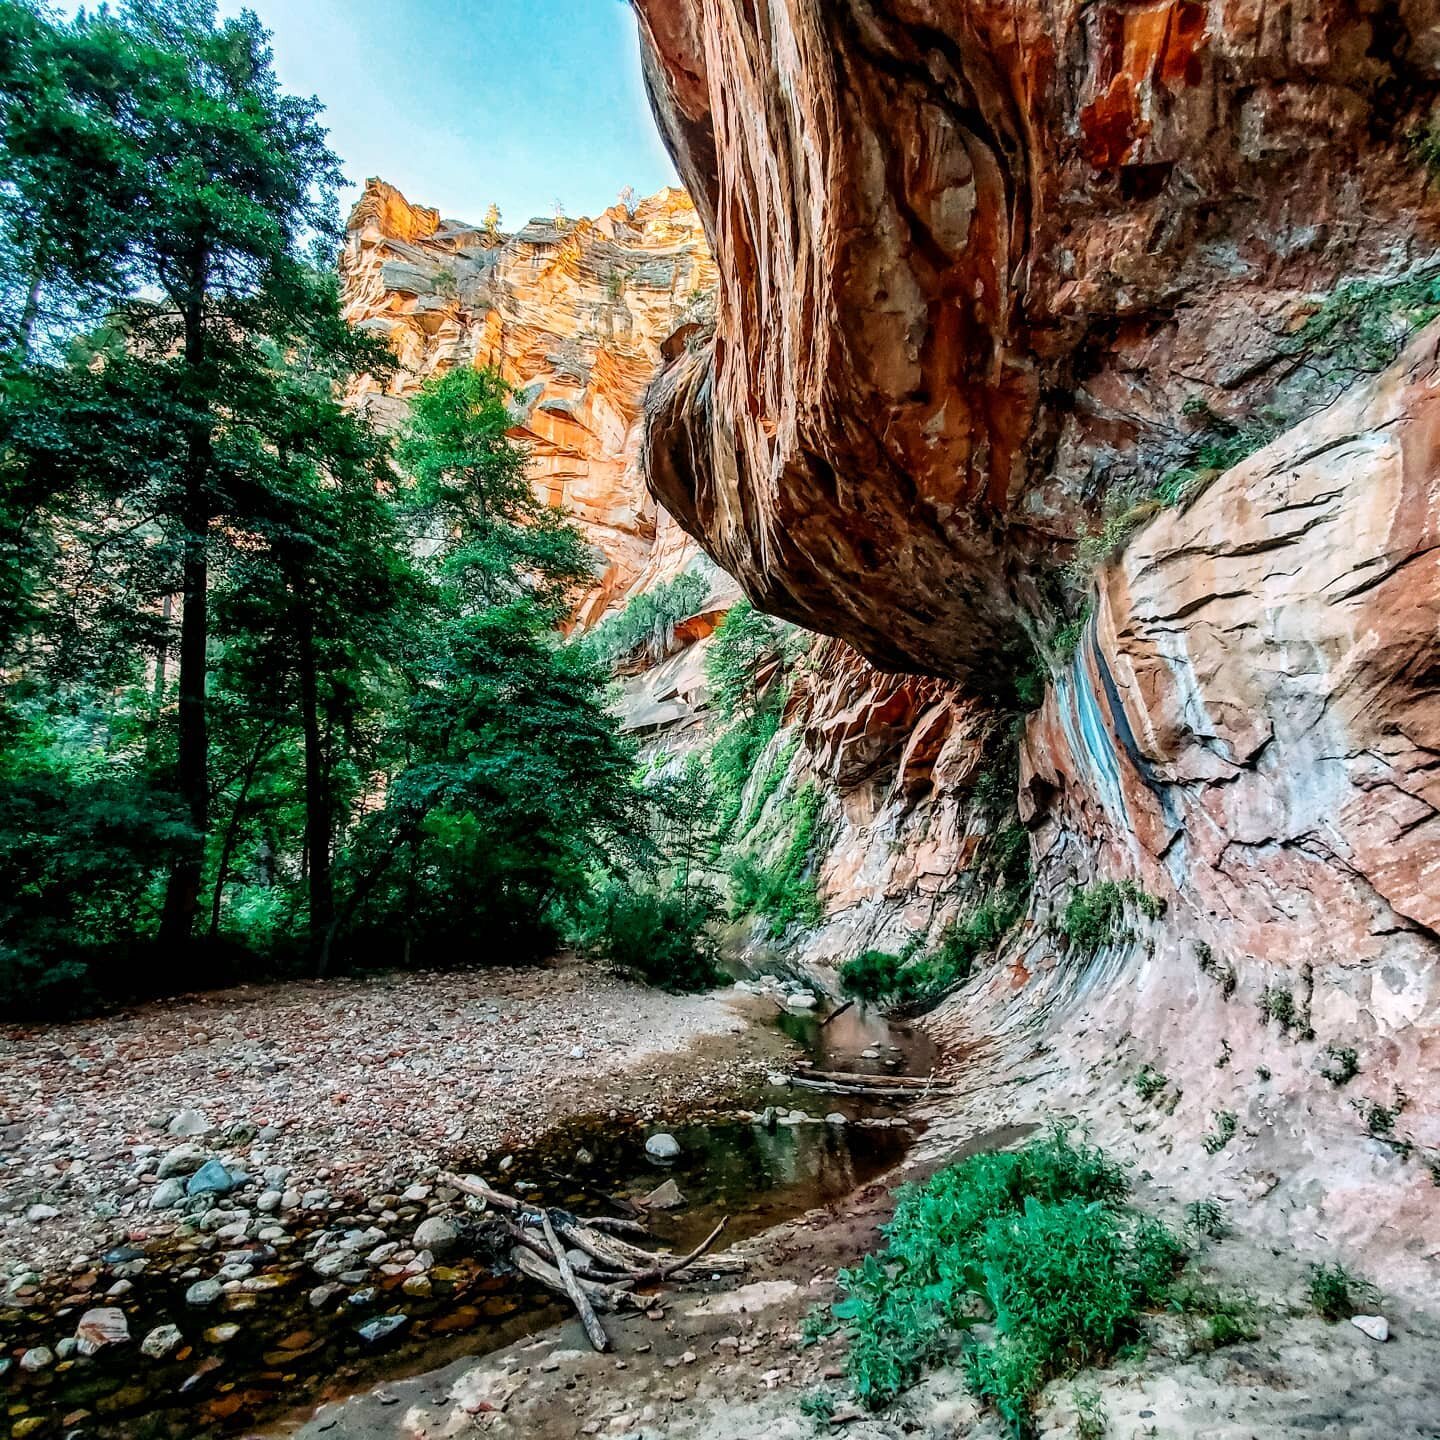 BEST HIKES IN SEDONA, ARIZONA 🏜️

💫 West Fork Trail [pictured above]
💫 Fay Canyon
💫 Soldier Pass
💫 Cathedral Rock
💫 Devil's Bridge 
💫 Airport Mesa
💫 Boynton Canyon
💫 Bear Mountain

#TravelTuesday